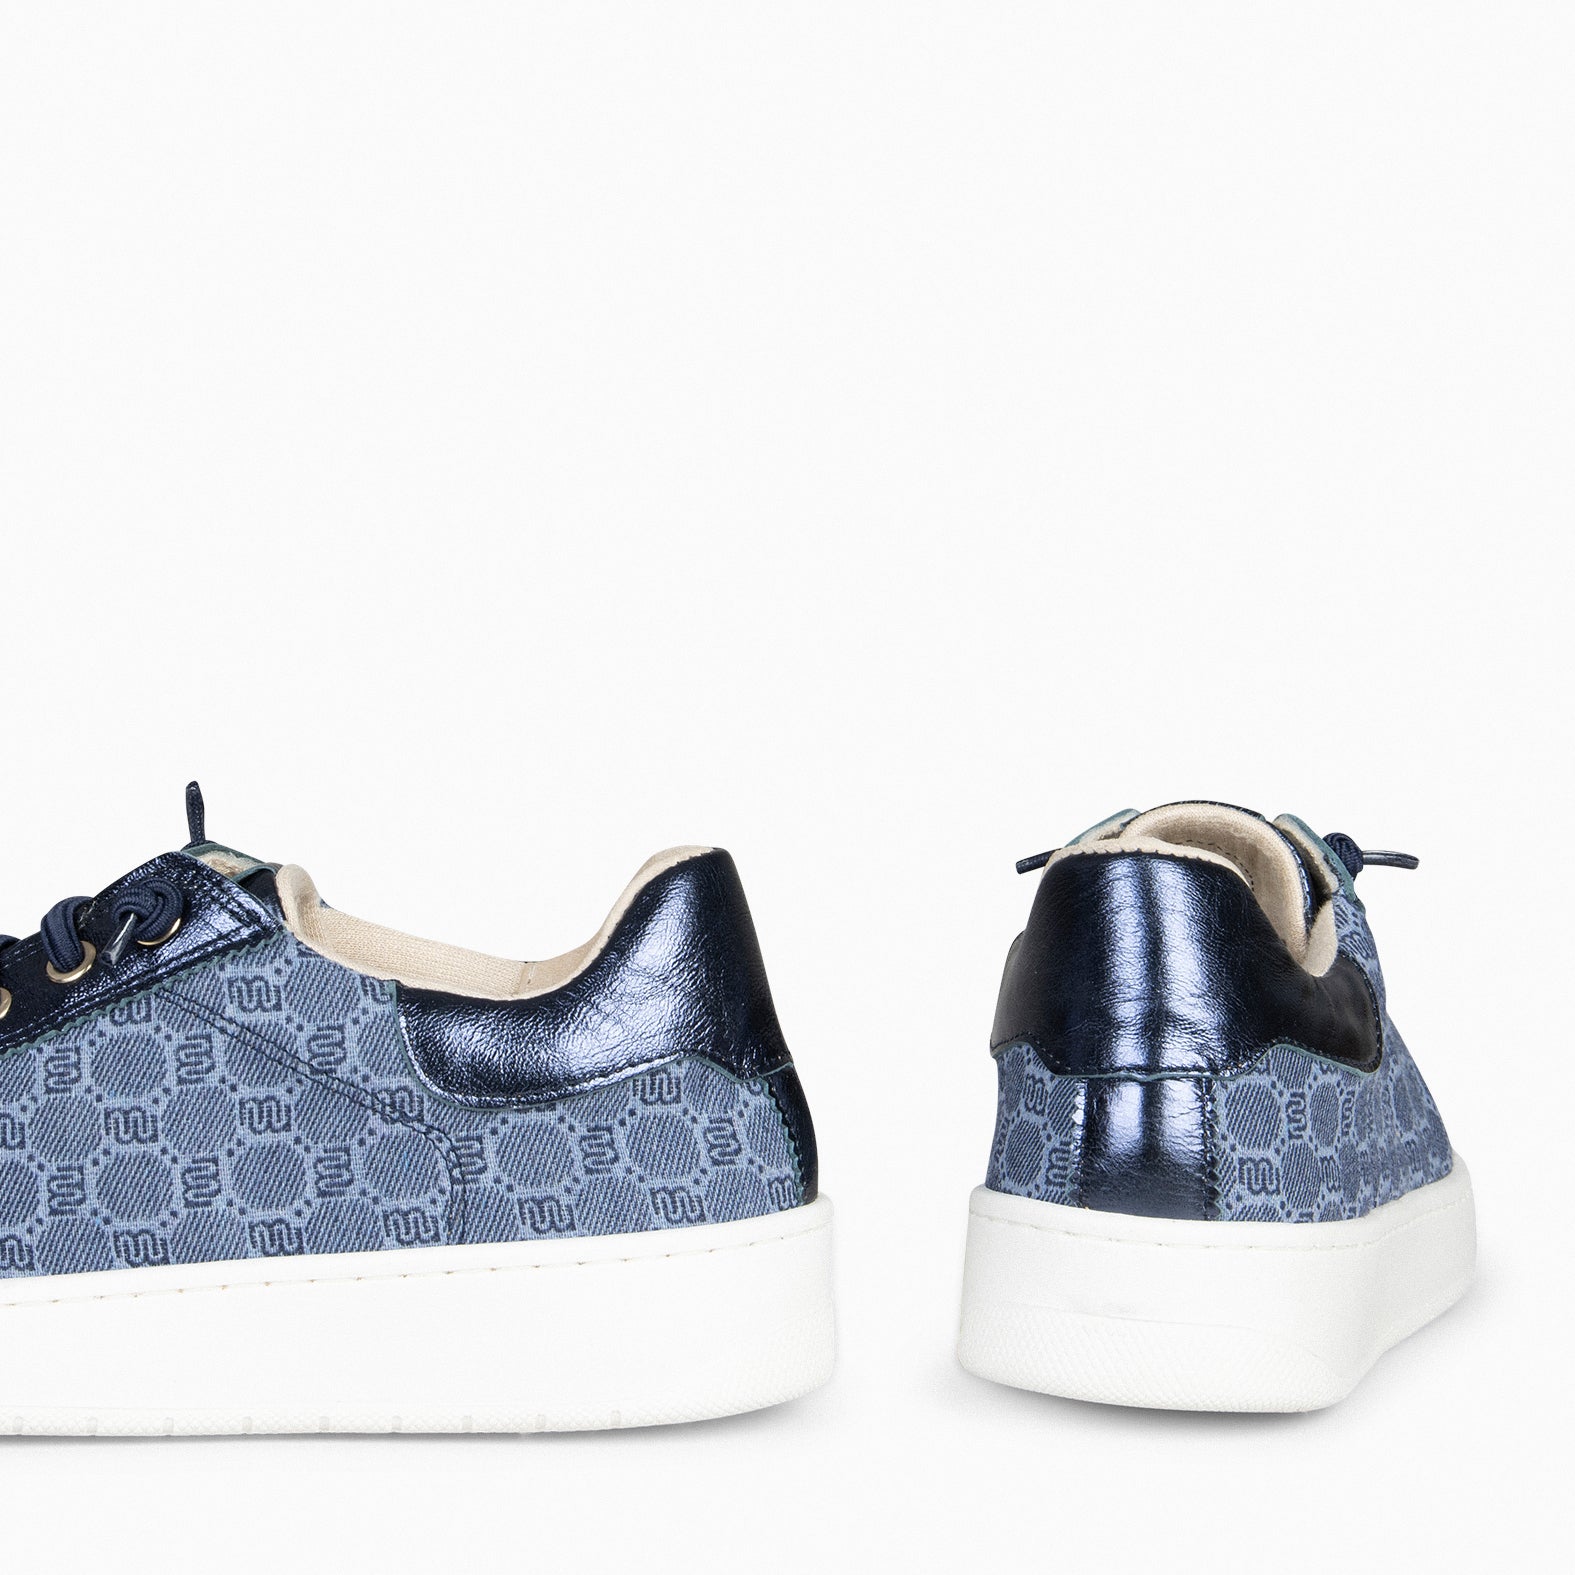 TOULOUSE - BLUE SNEAKERS WITH ELASTIC LACES